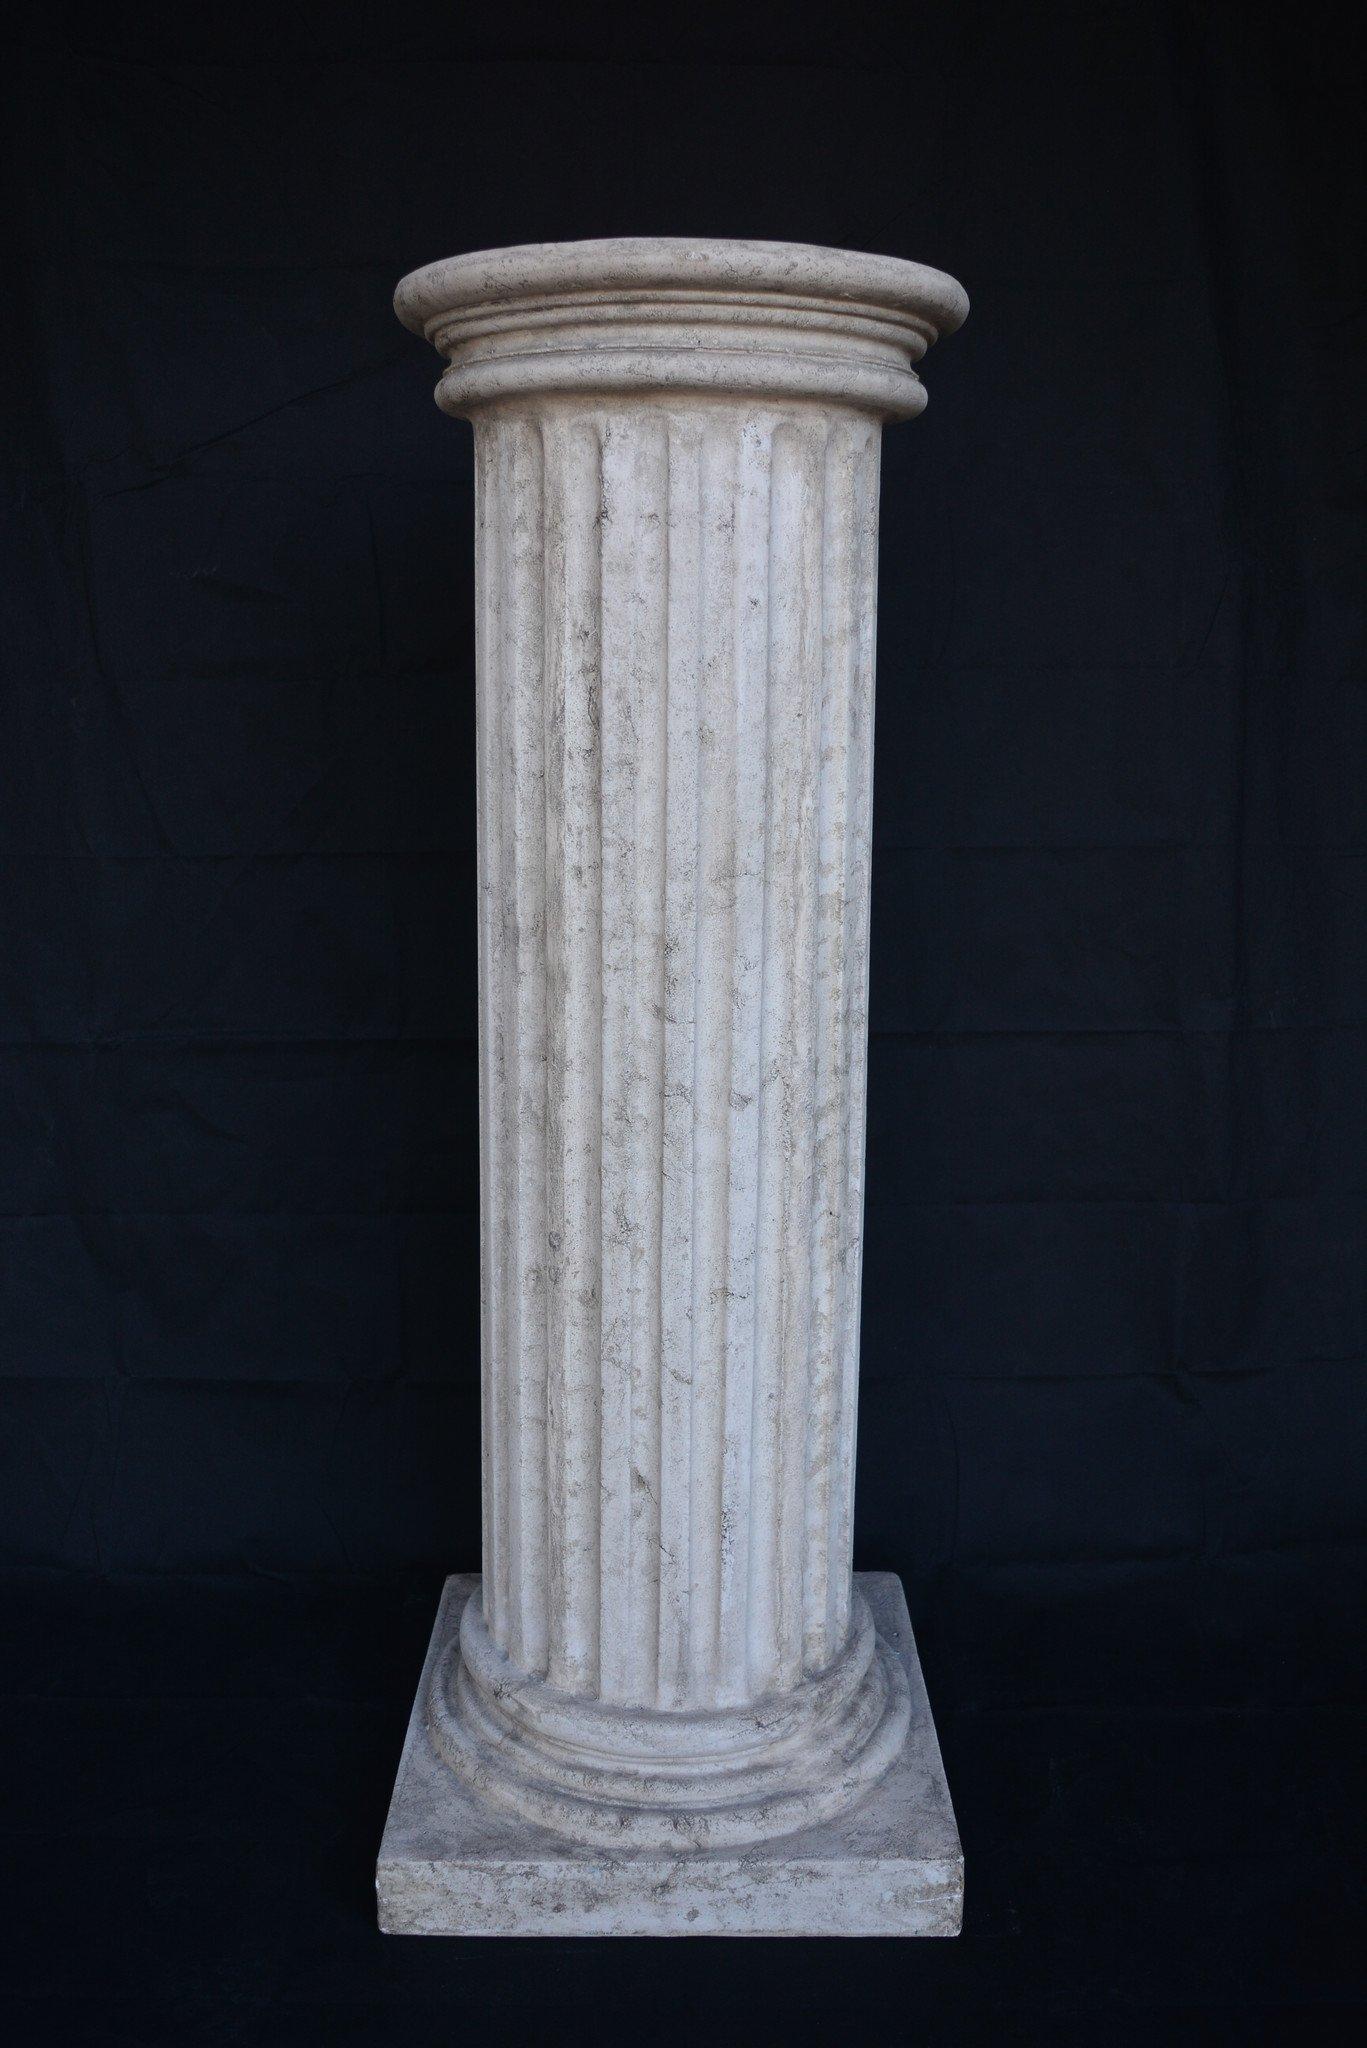 Large Fluted (half) column.

This is a very large grand column, round with a square base.

The surface is distressed from the passage of time, but can also be produced in a new white color.